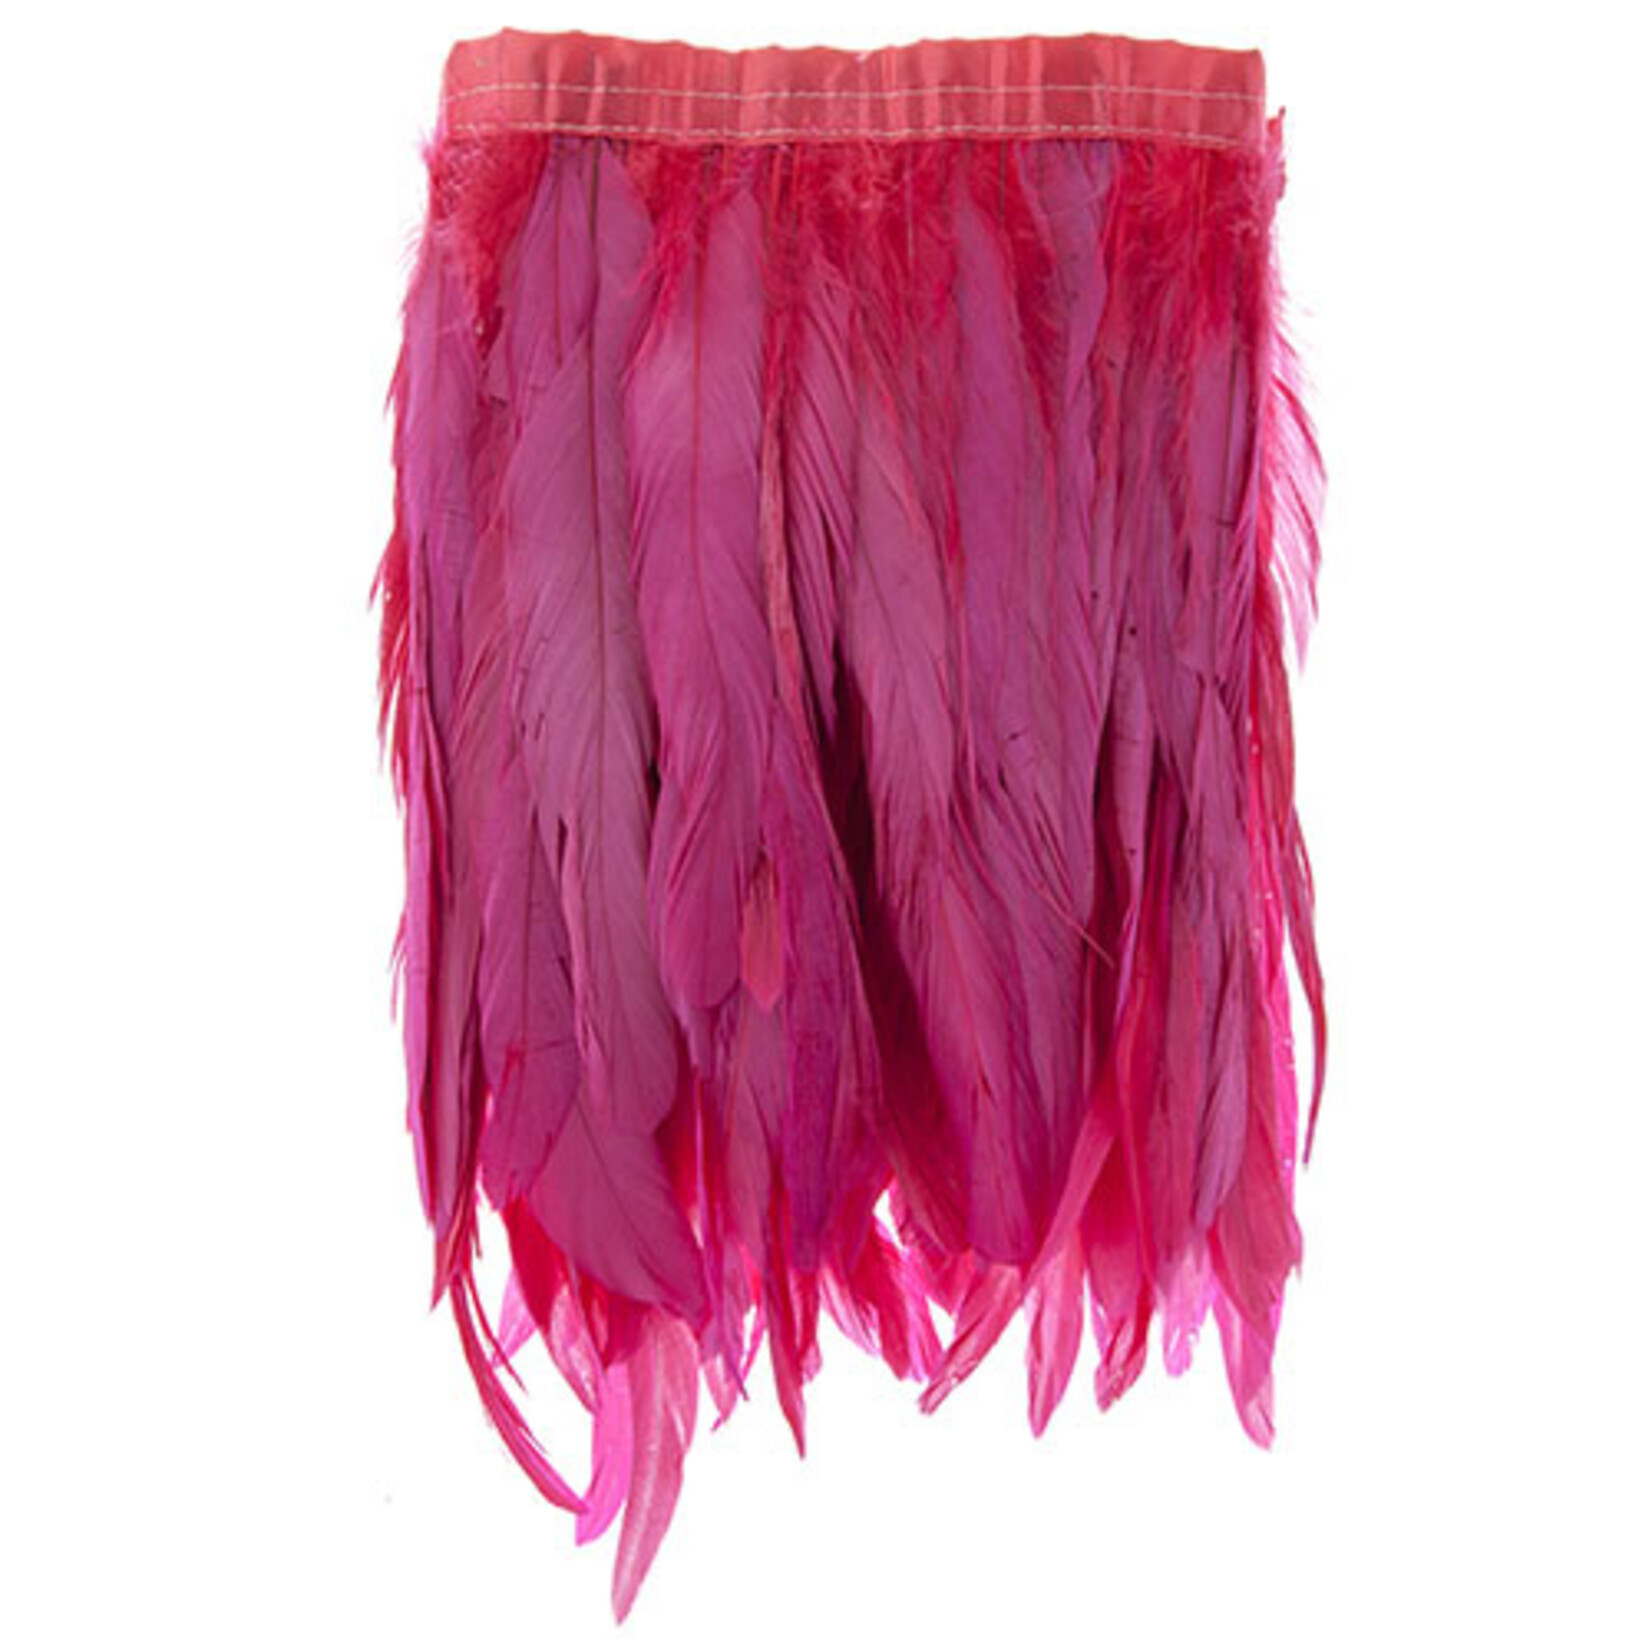 Coque Feathers Value 12-14 Inches Dark Coral